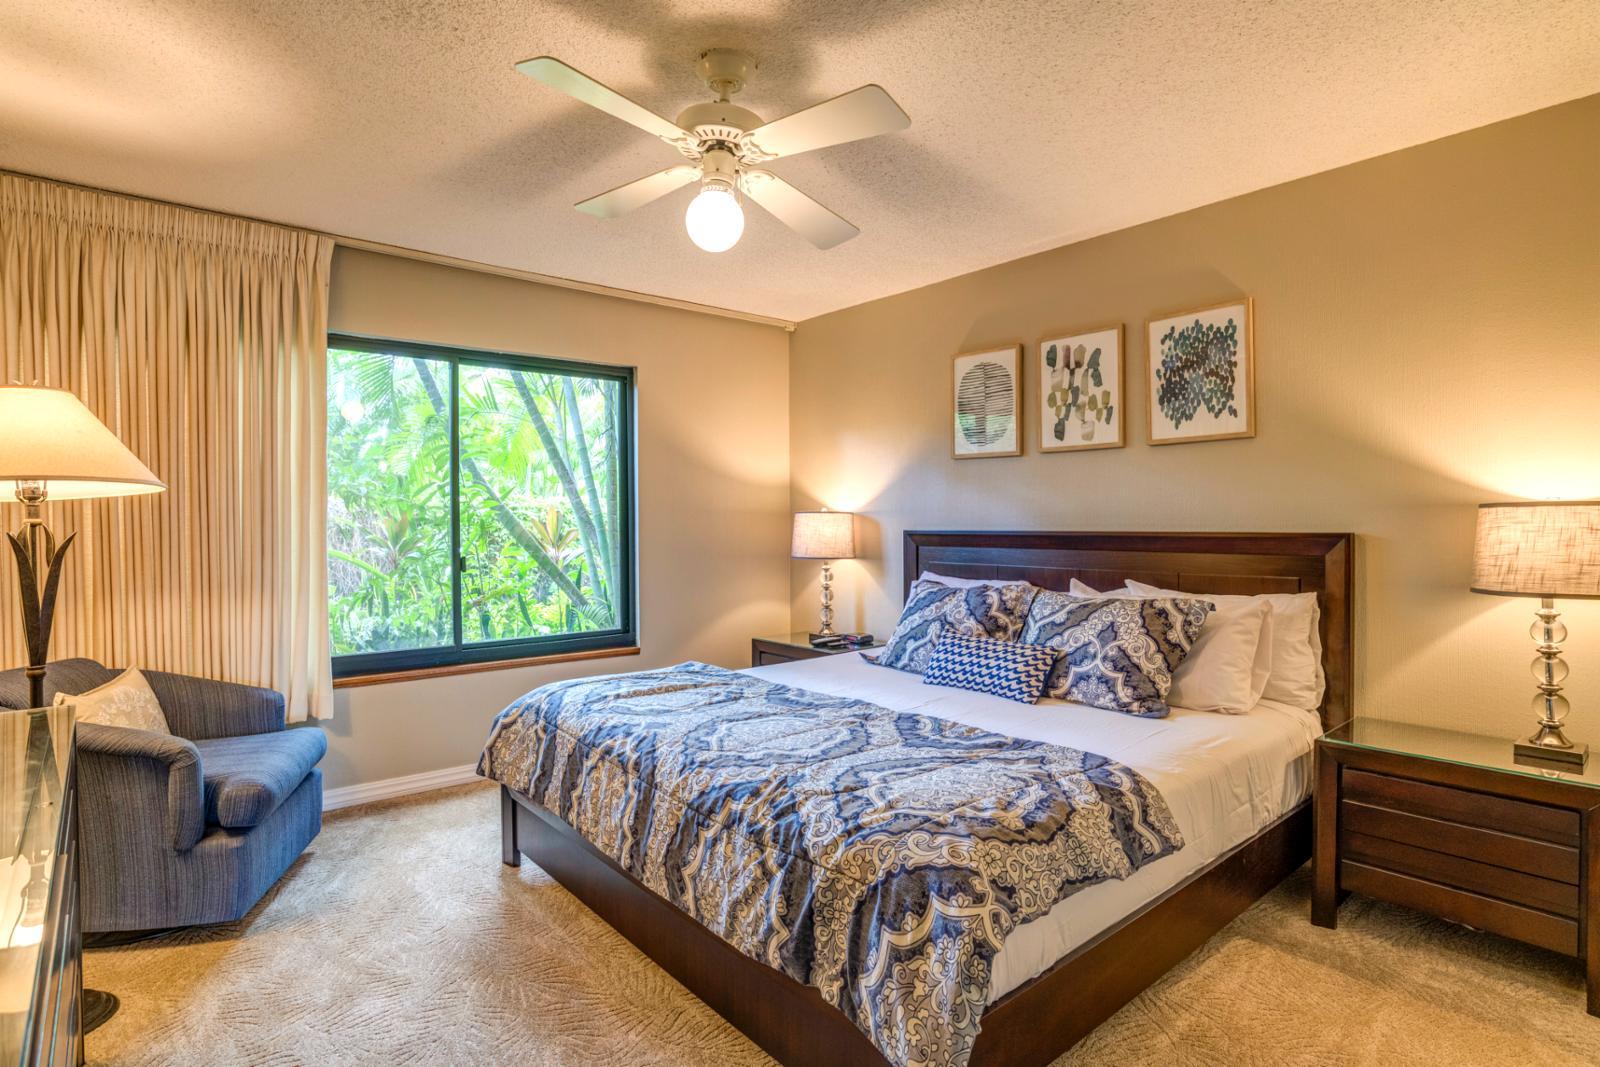 Central AC and equipped with a ceiling fan, stunning resort views!